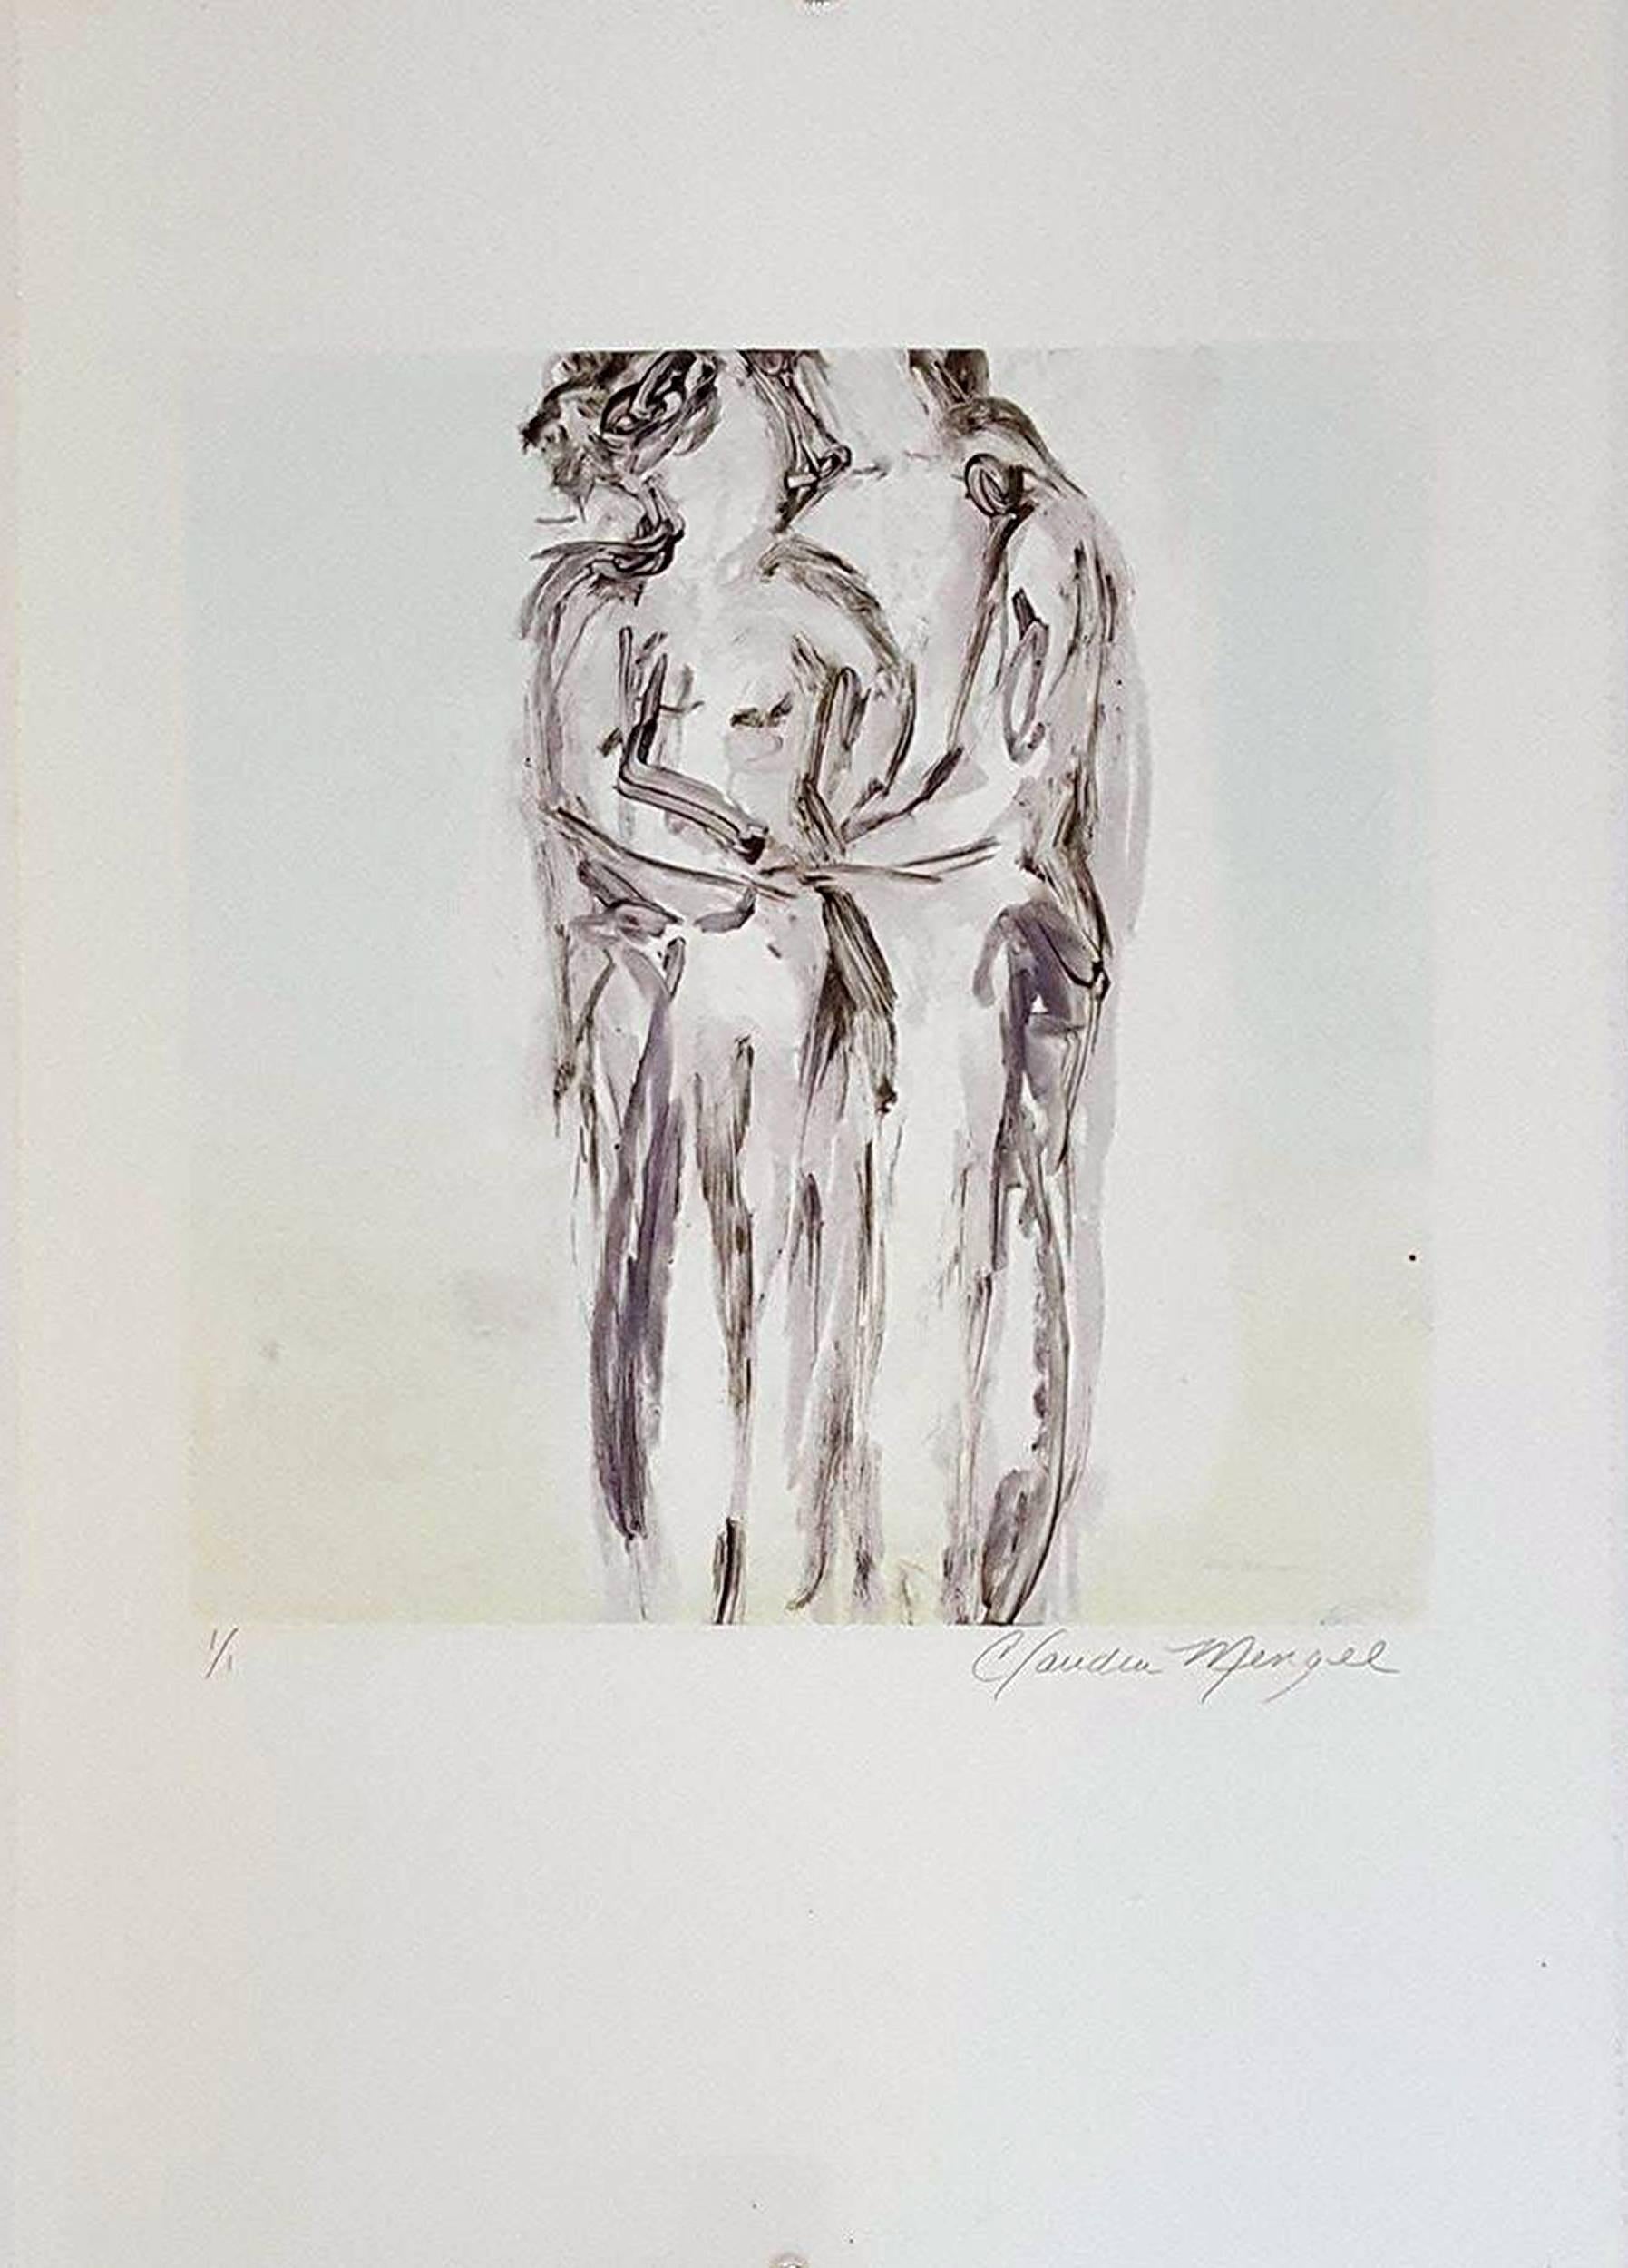 Two Figures Embracing - Print by Claudia Mengel